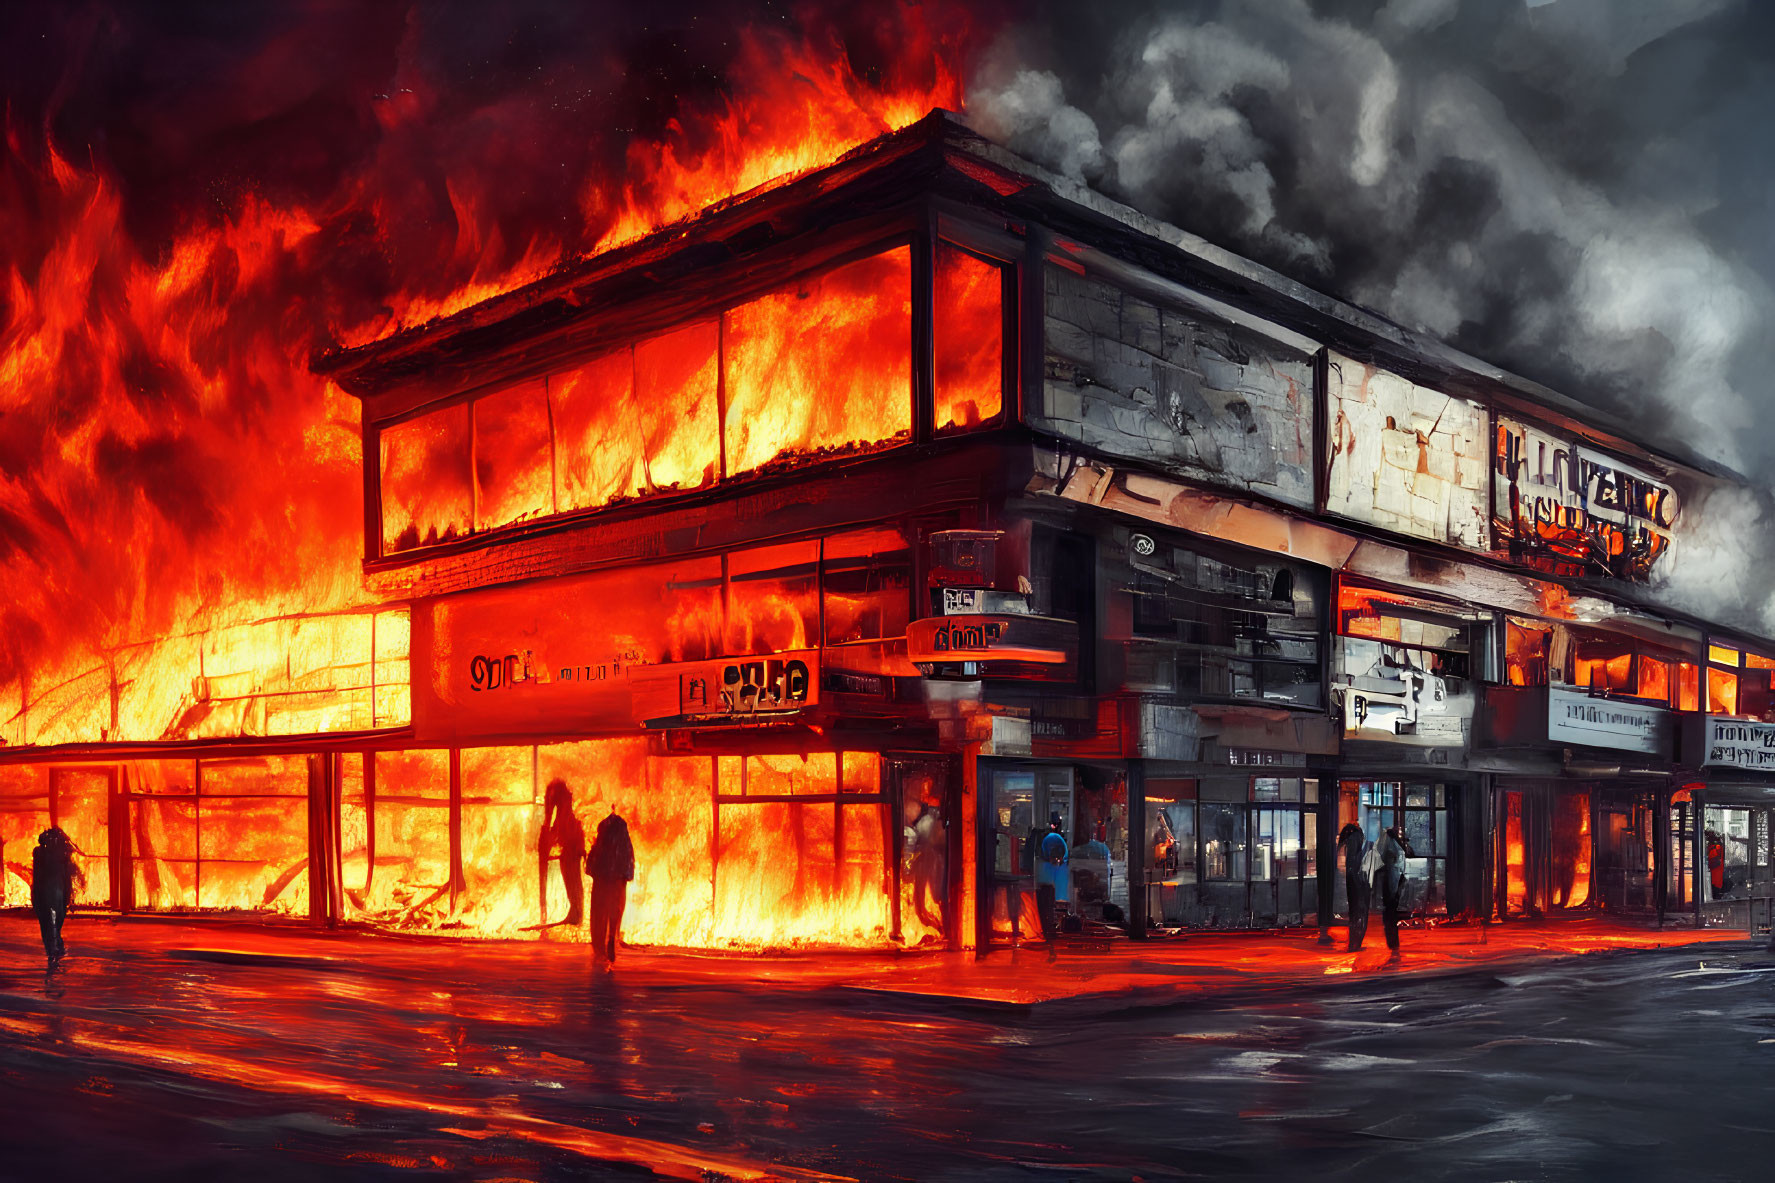 Illustration of multi-story building engulfed in flames at night.